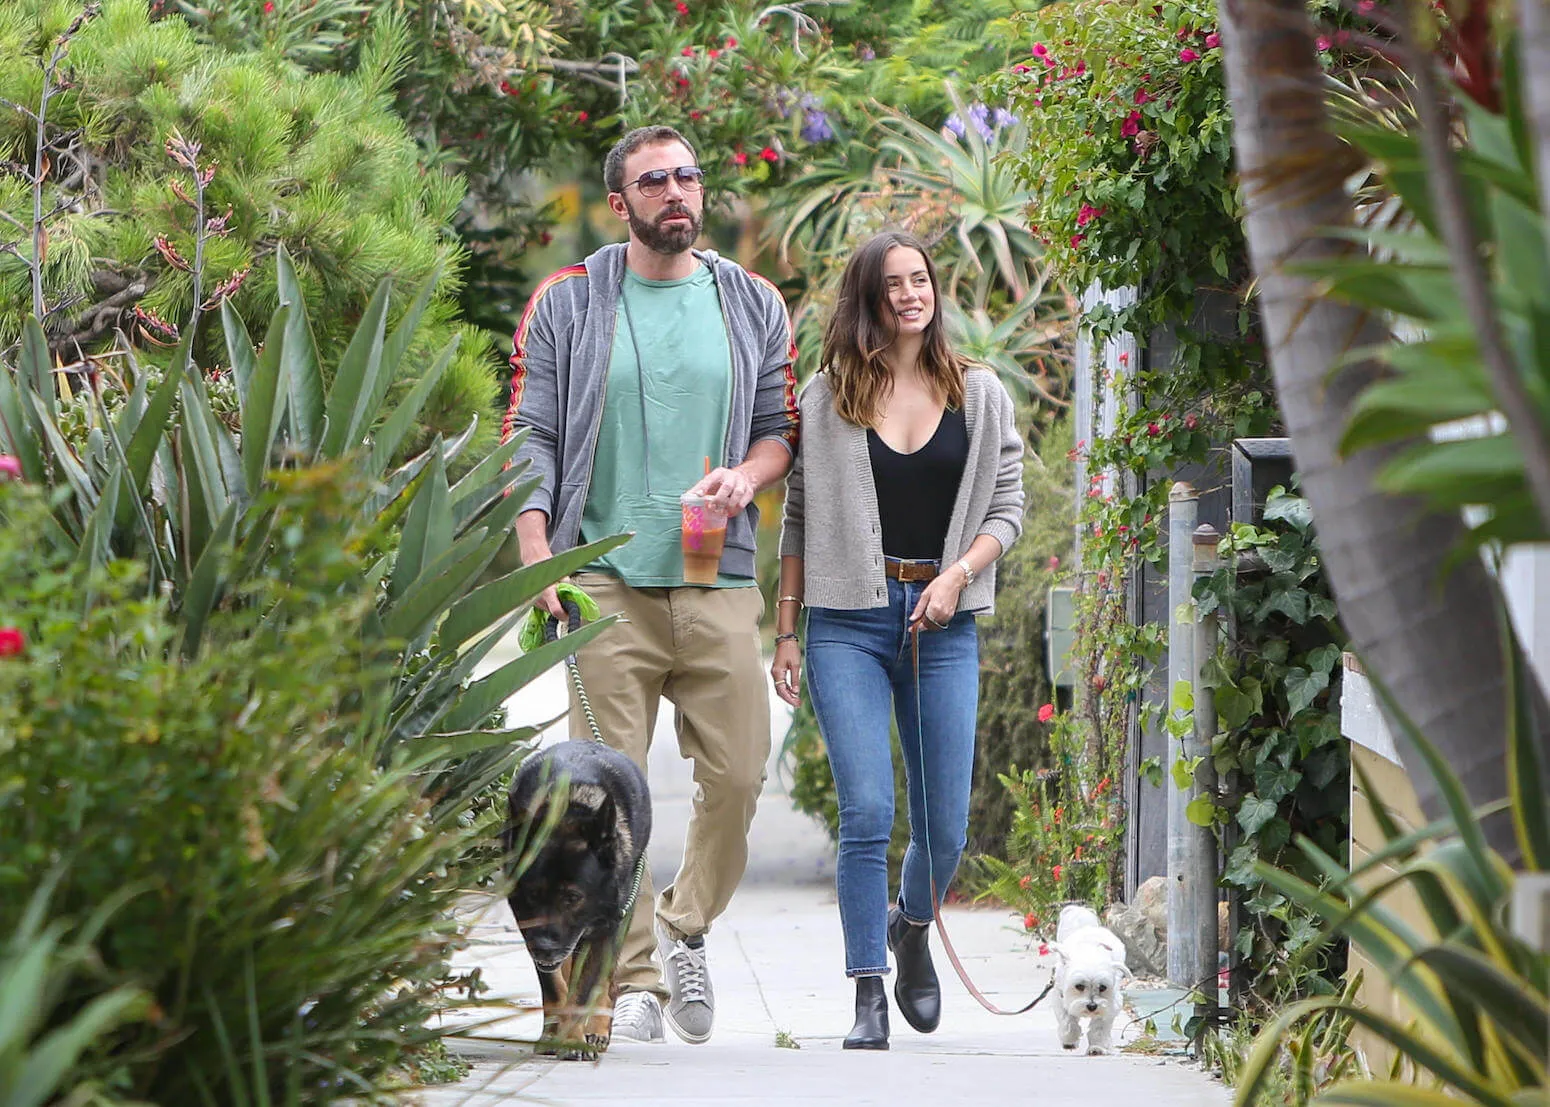 Ben Affleck and Ana de Armas on a walk with Affleck's dog in July 2020